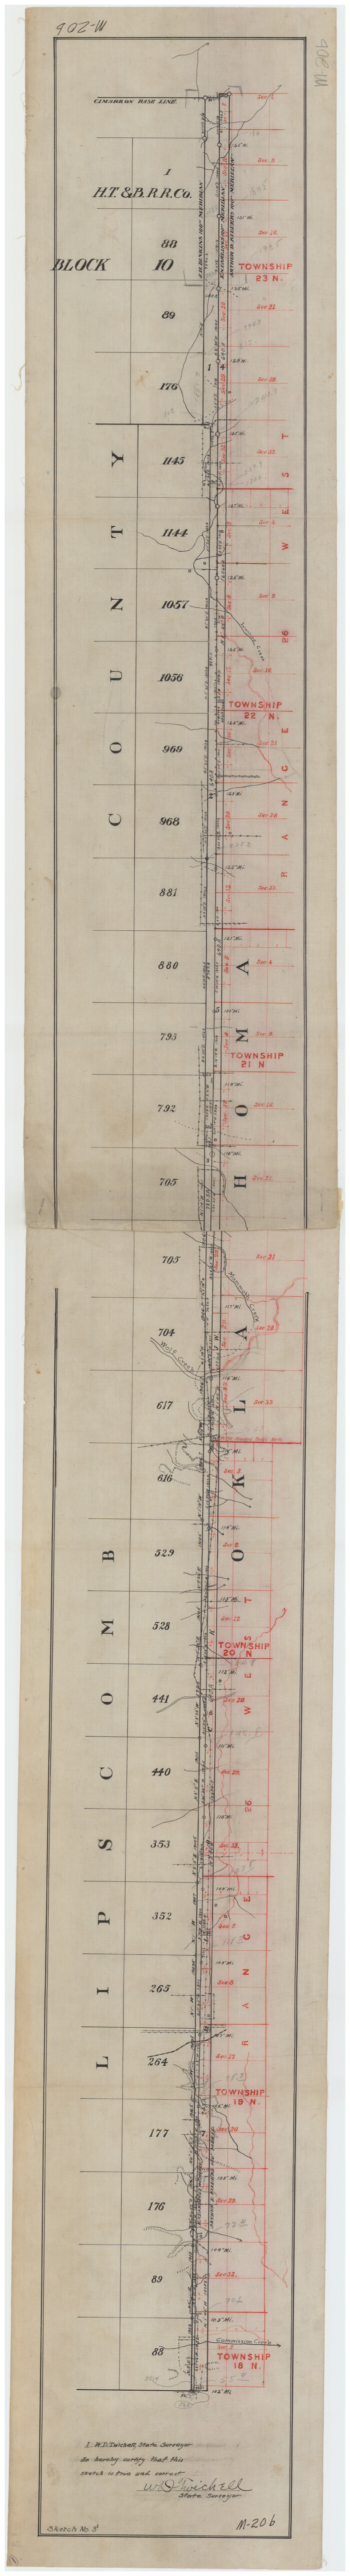 89823, [East line of Lipscomb County along Oklahoma], Twichell Survey Records